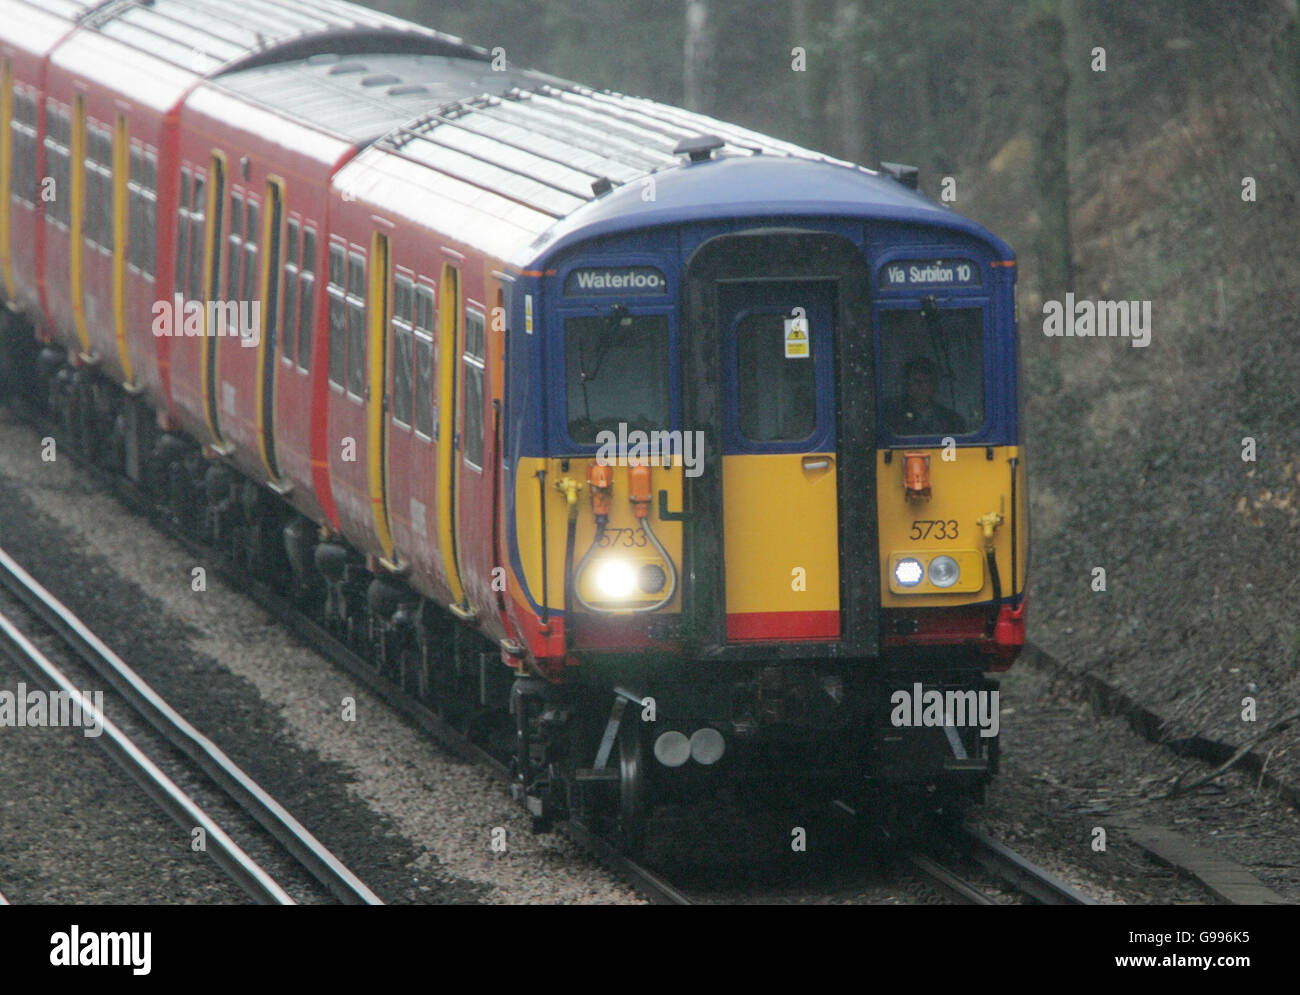 A South West Trains Class 455 Electric train on the line between Waterloo and Woking. Stock Photo